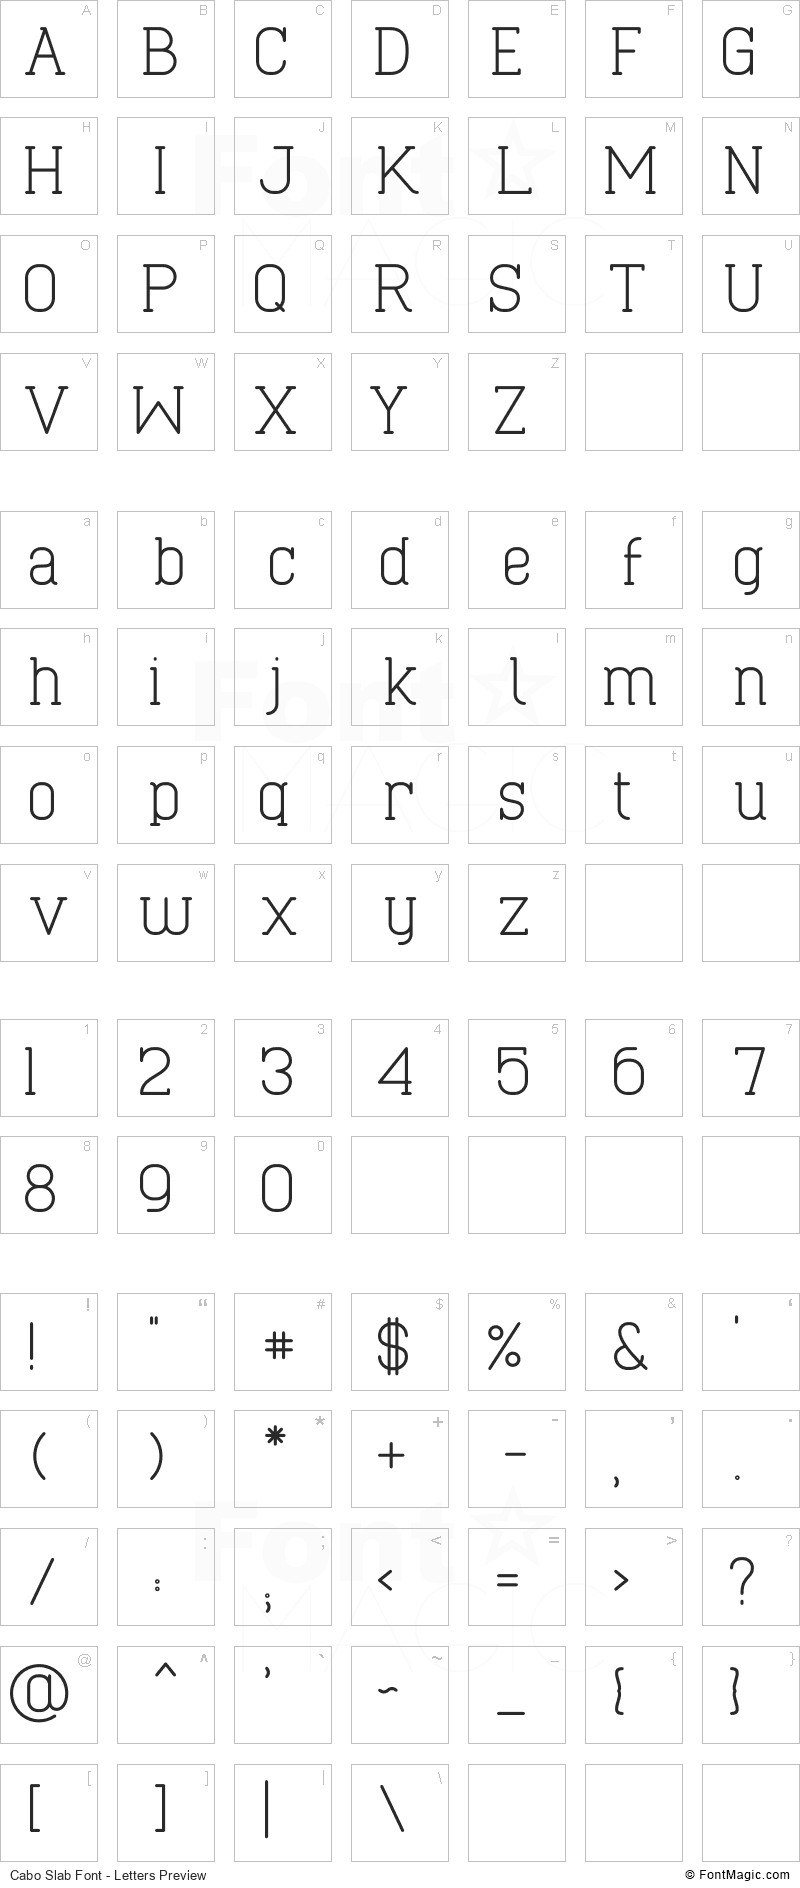 Cabo Slab Font - All Latters Preview Chart